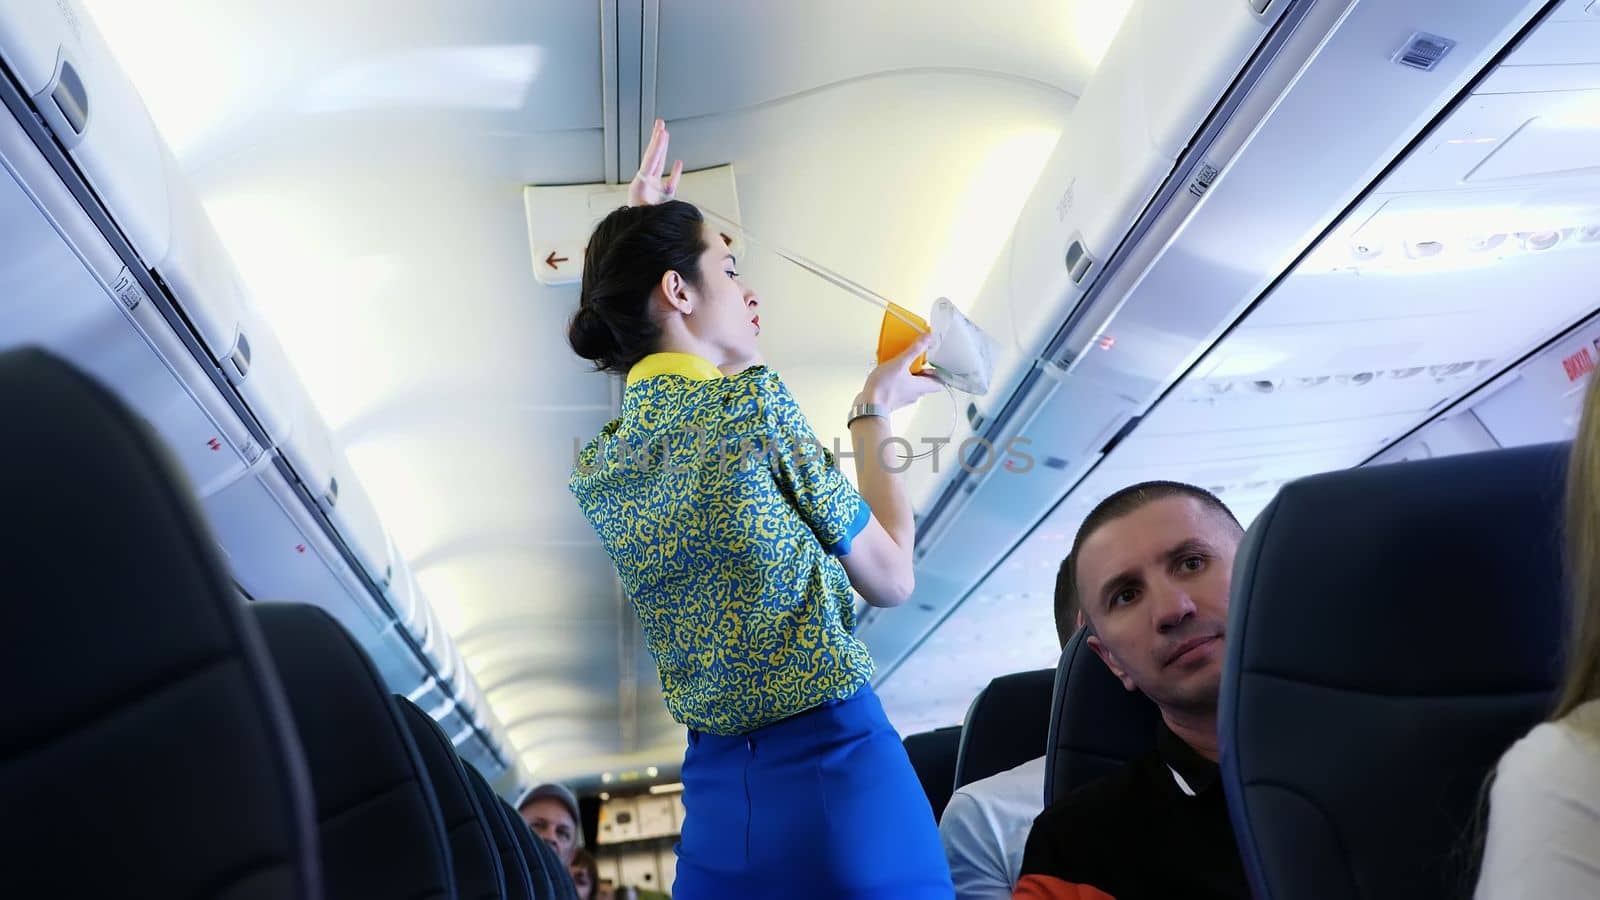 AIRPORT BORYSPIL, UKRAINE - OCTOBER 24, 2018: Ukraine International Airlines. Flight attendant, stewardess gives preflight instructions, during Pre-flight safety demonstration. Interior of airplane with passengers on seats by djtreneryay